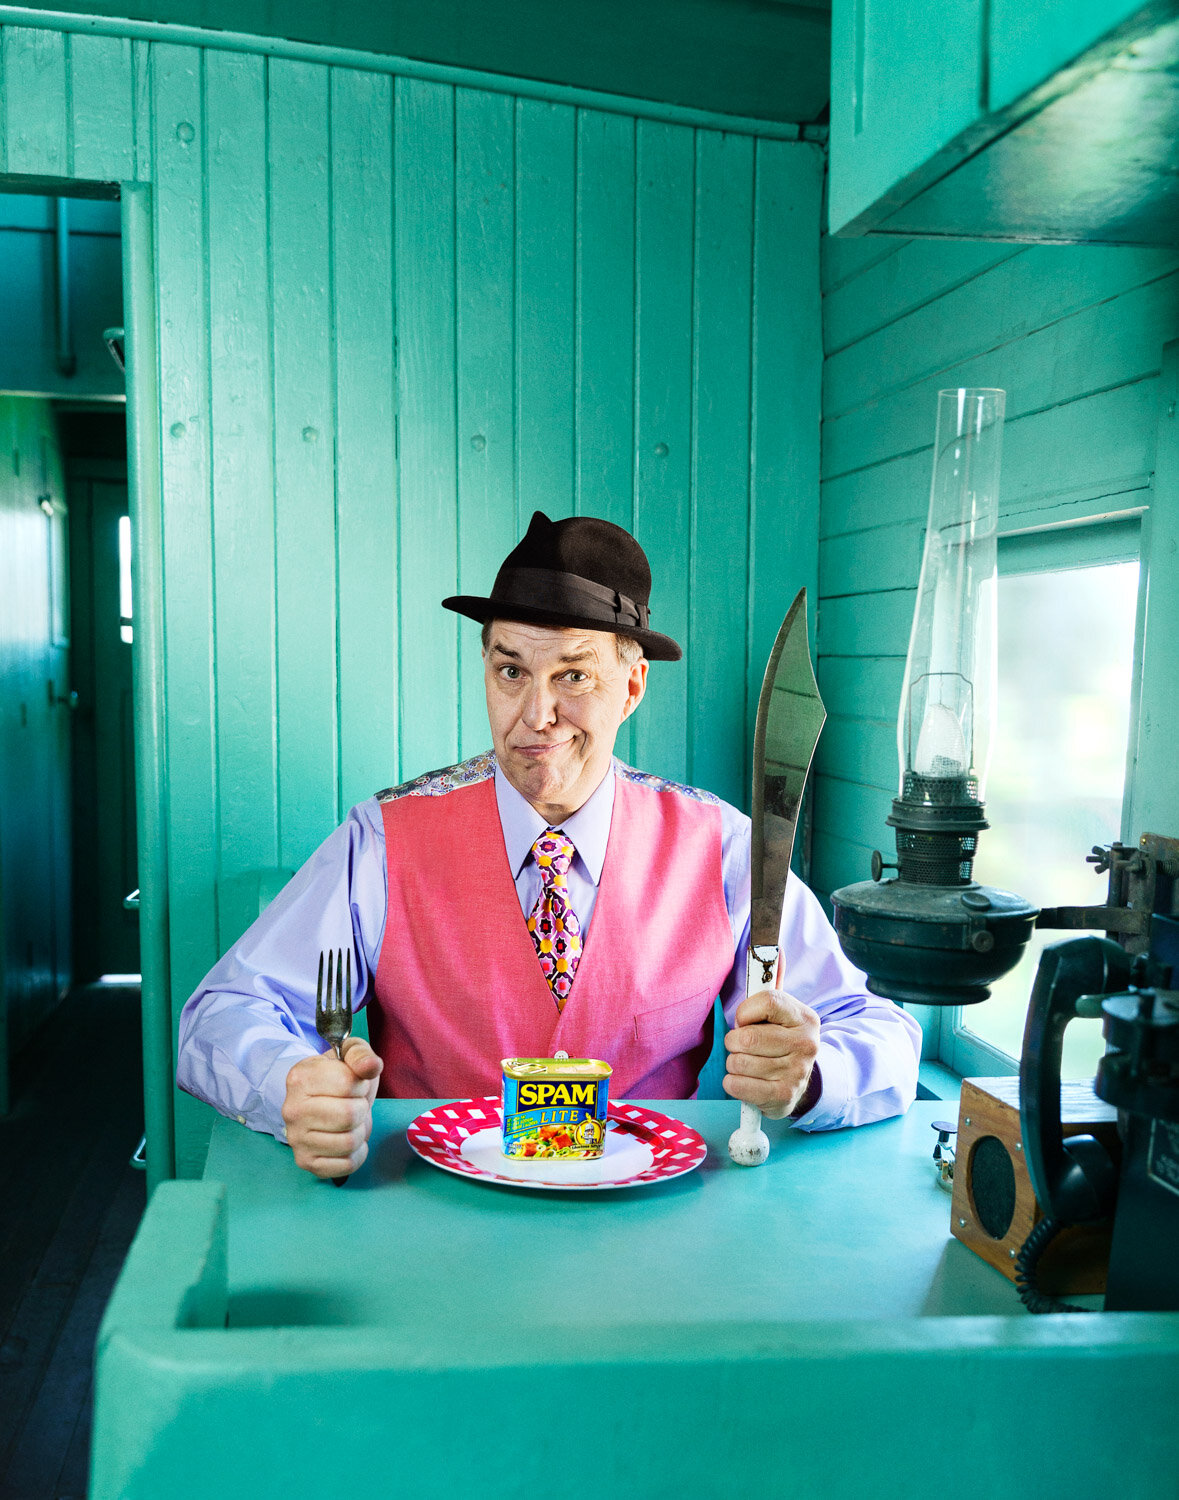 funny promotional portrait of juggler sitting in vintage train car with a machette, fork, and can of spam.